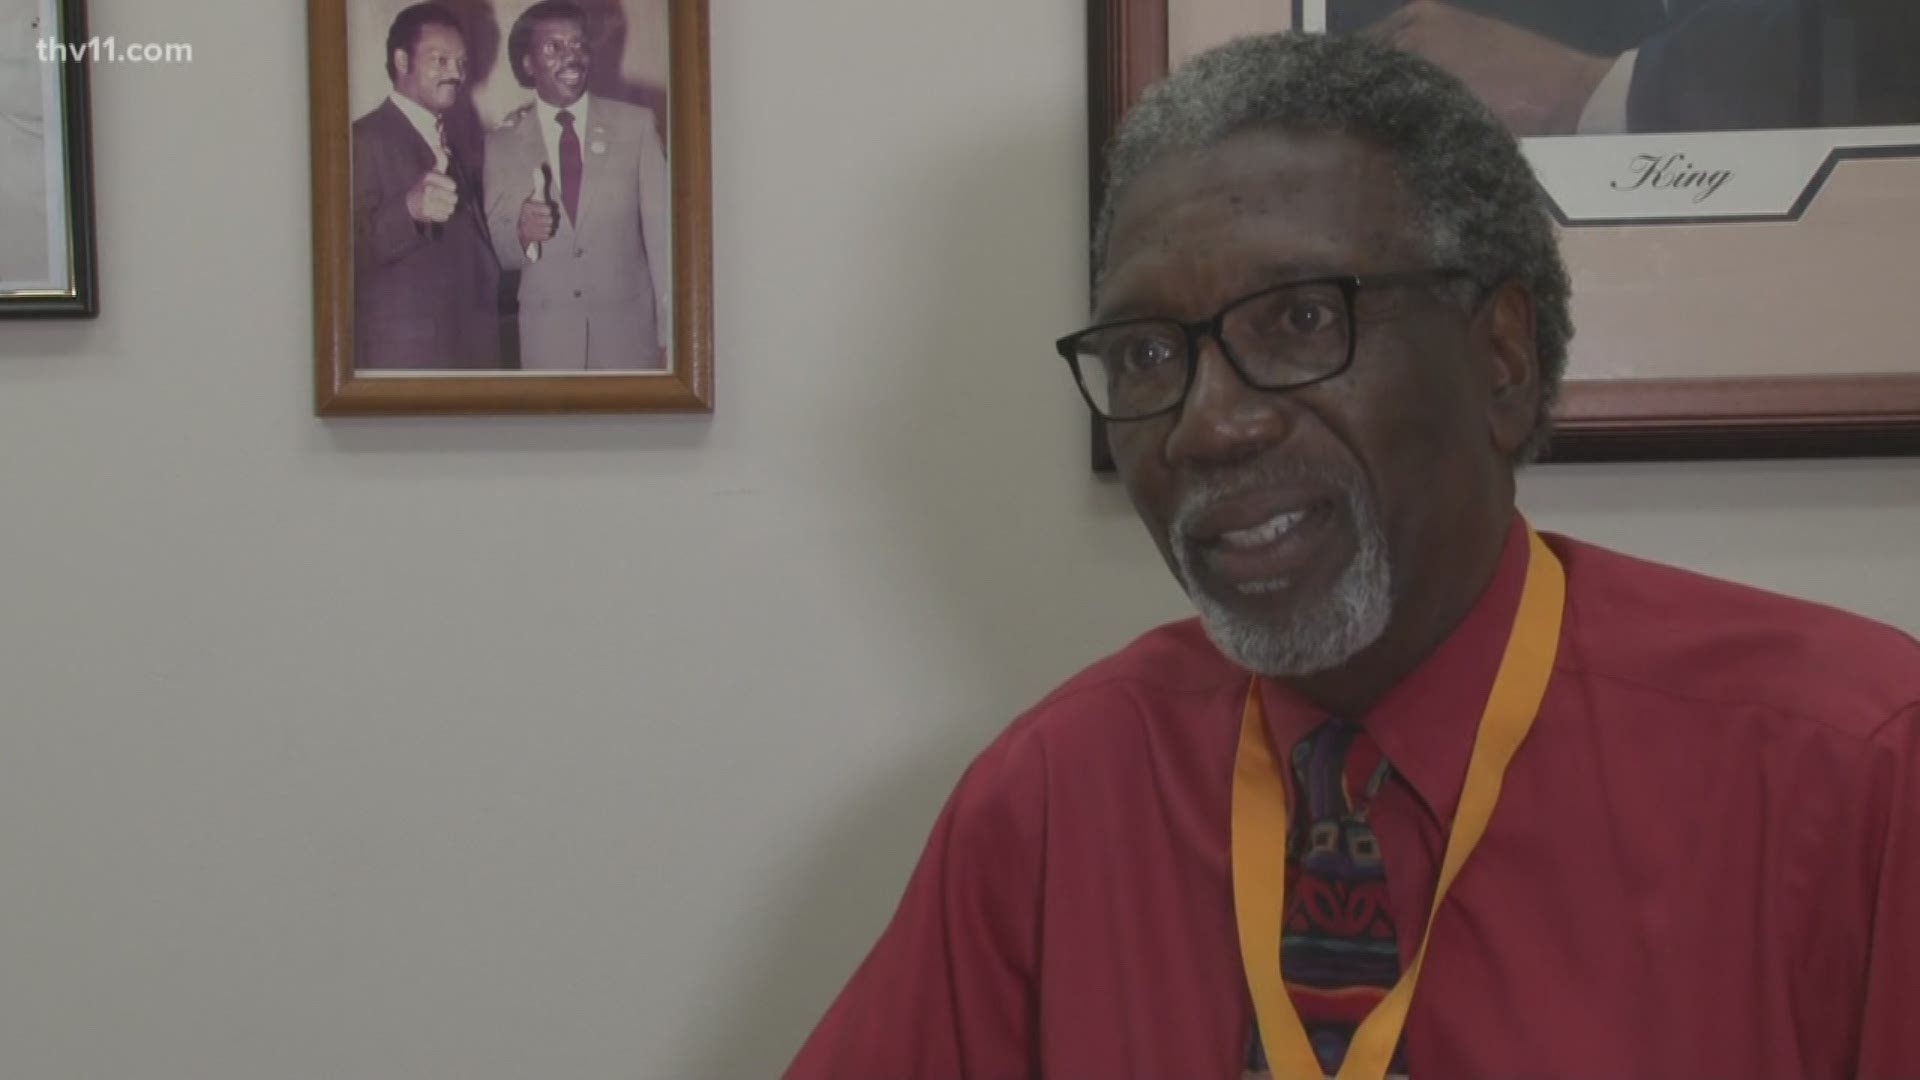 A first for Arkansas took place this weekend when one Pine Bluff native was recognized nationally for helping preserve and contribute to 400 years of African American history.